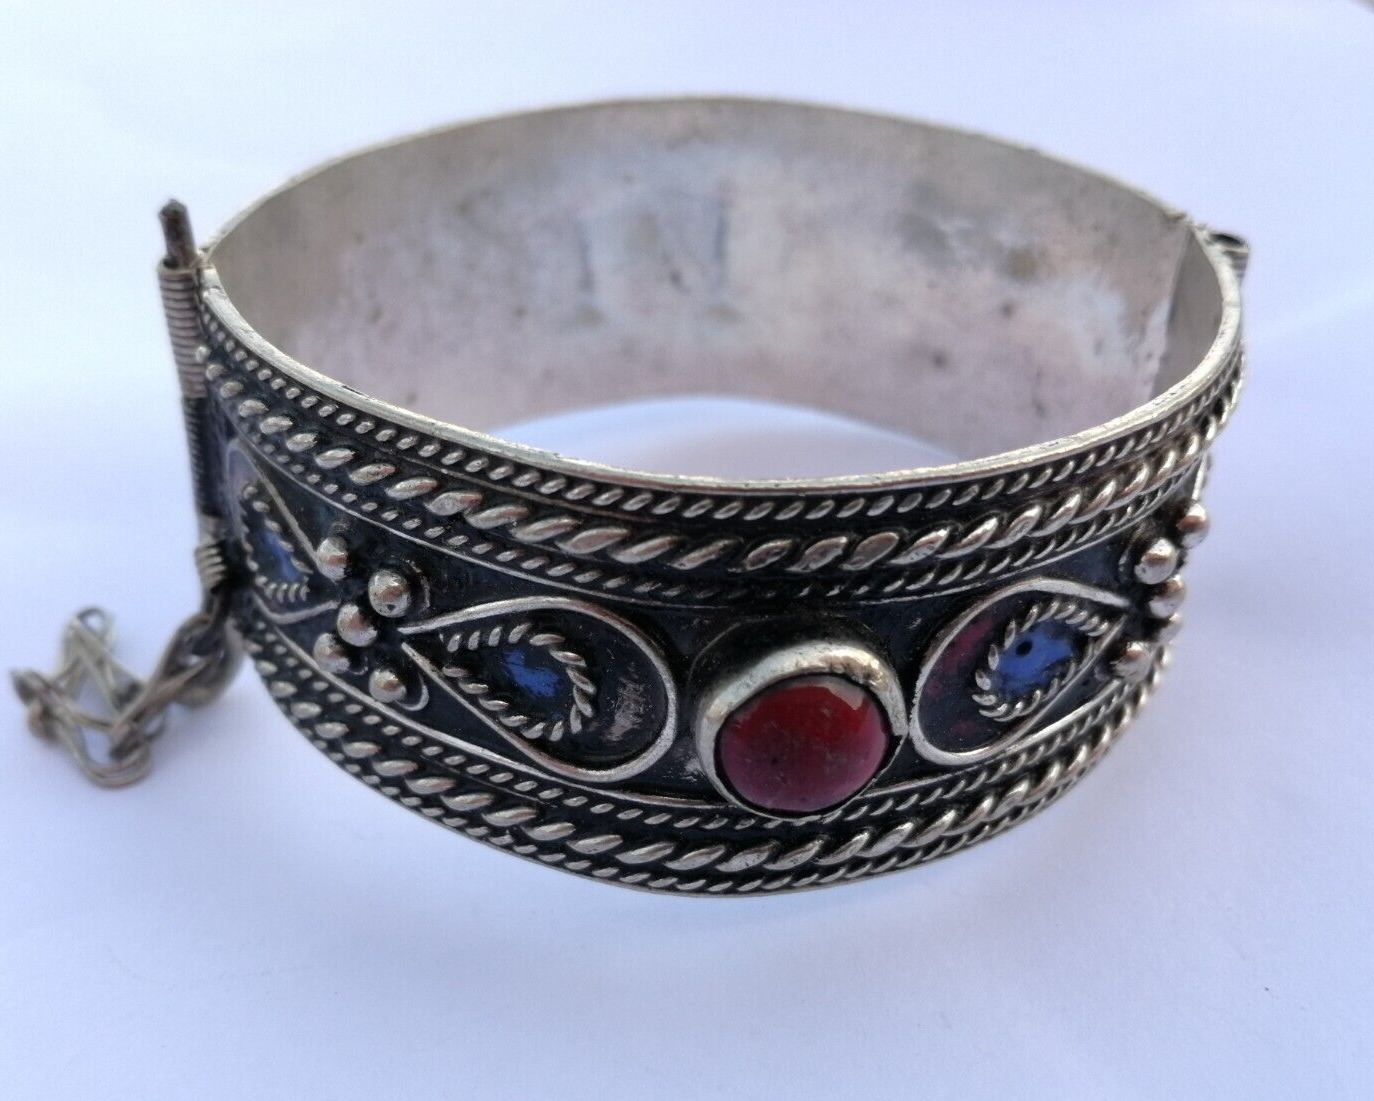 VINTAGE NORTH AFRICAN BERBER SILVERED BANGLE BRACELET WITH STONE INSERTS